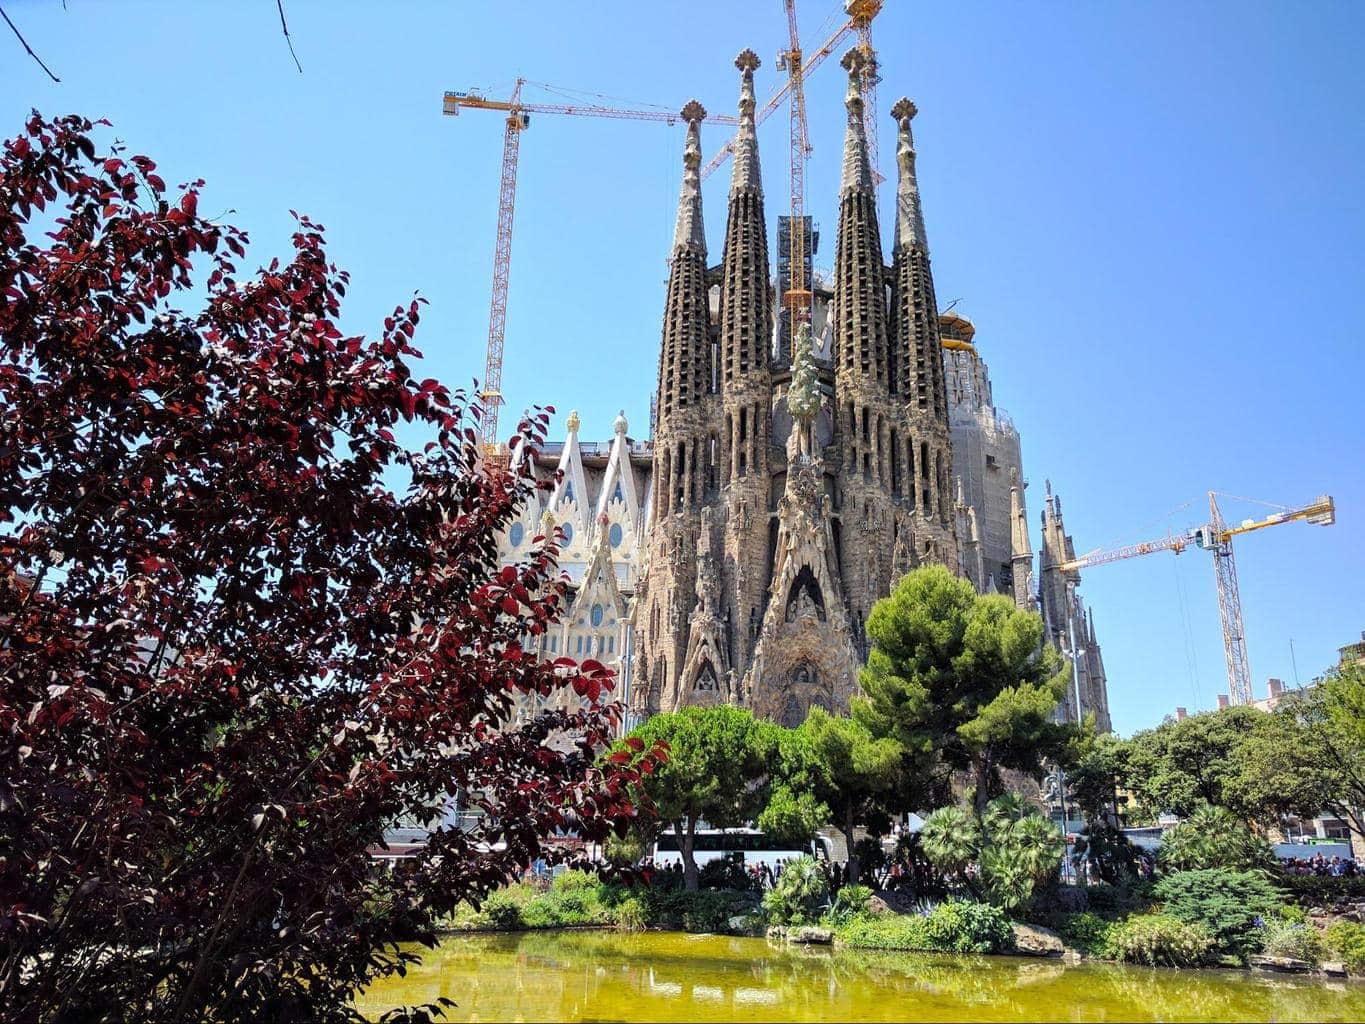 Sagrada Familia viewed from the park